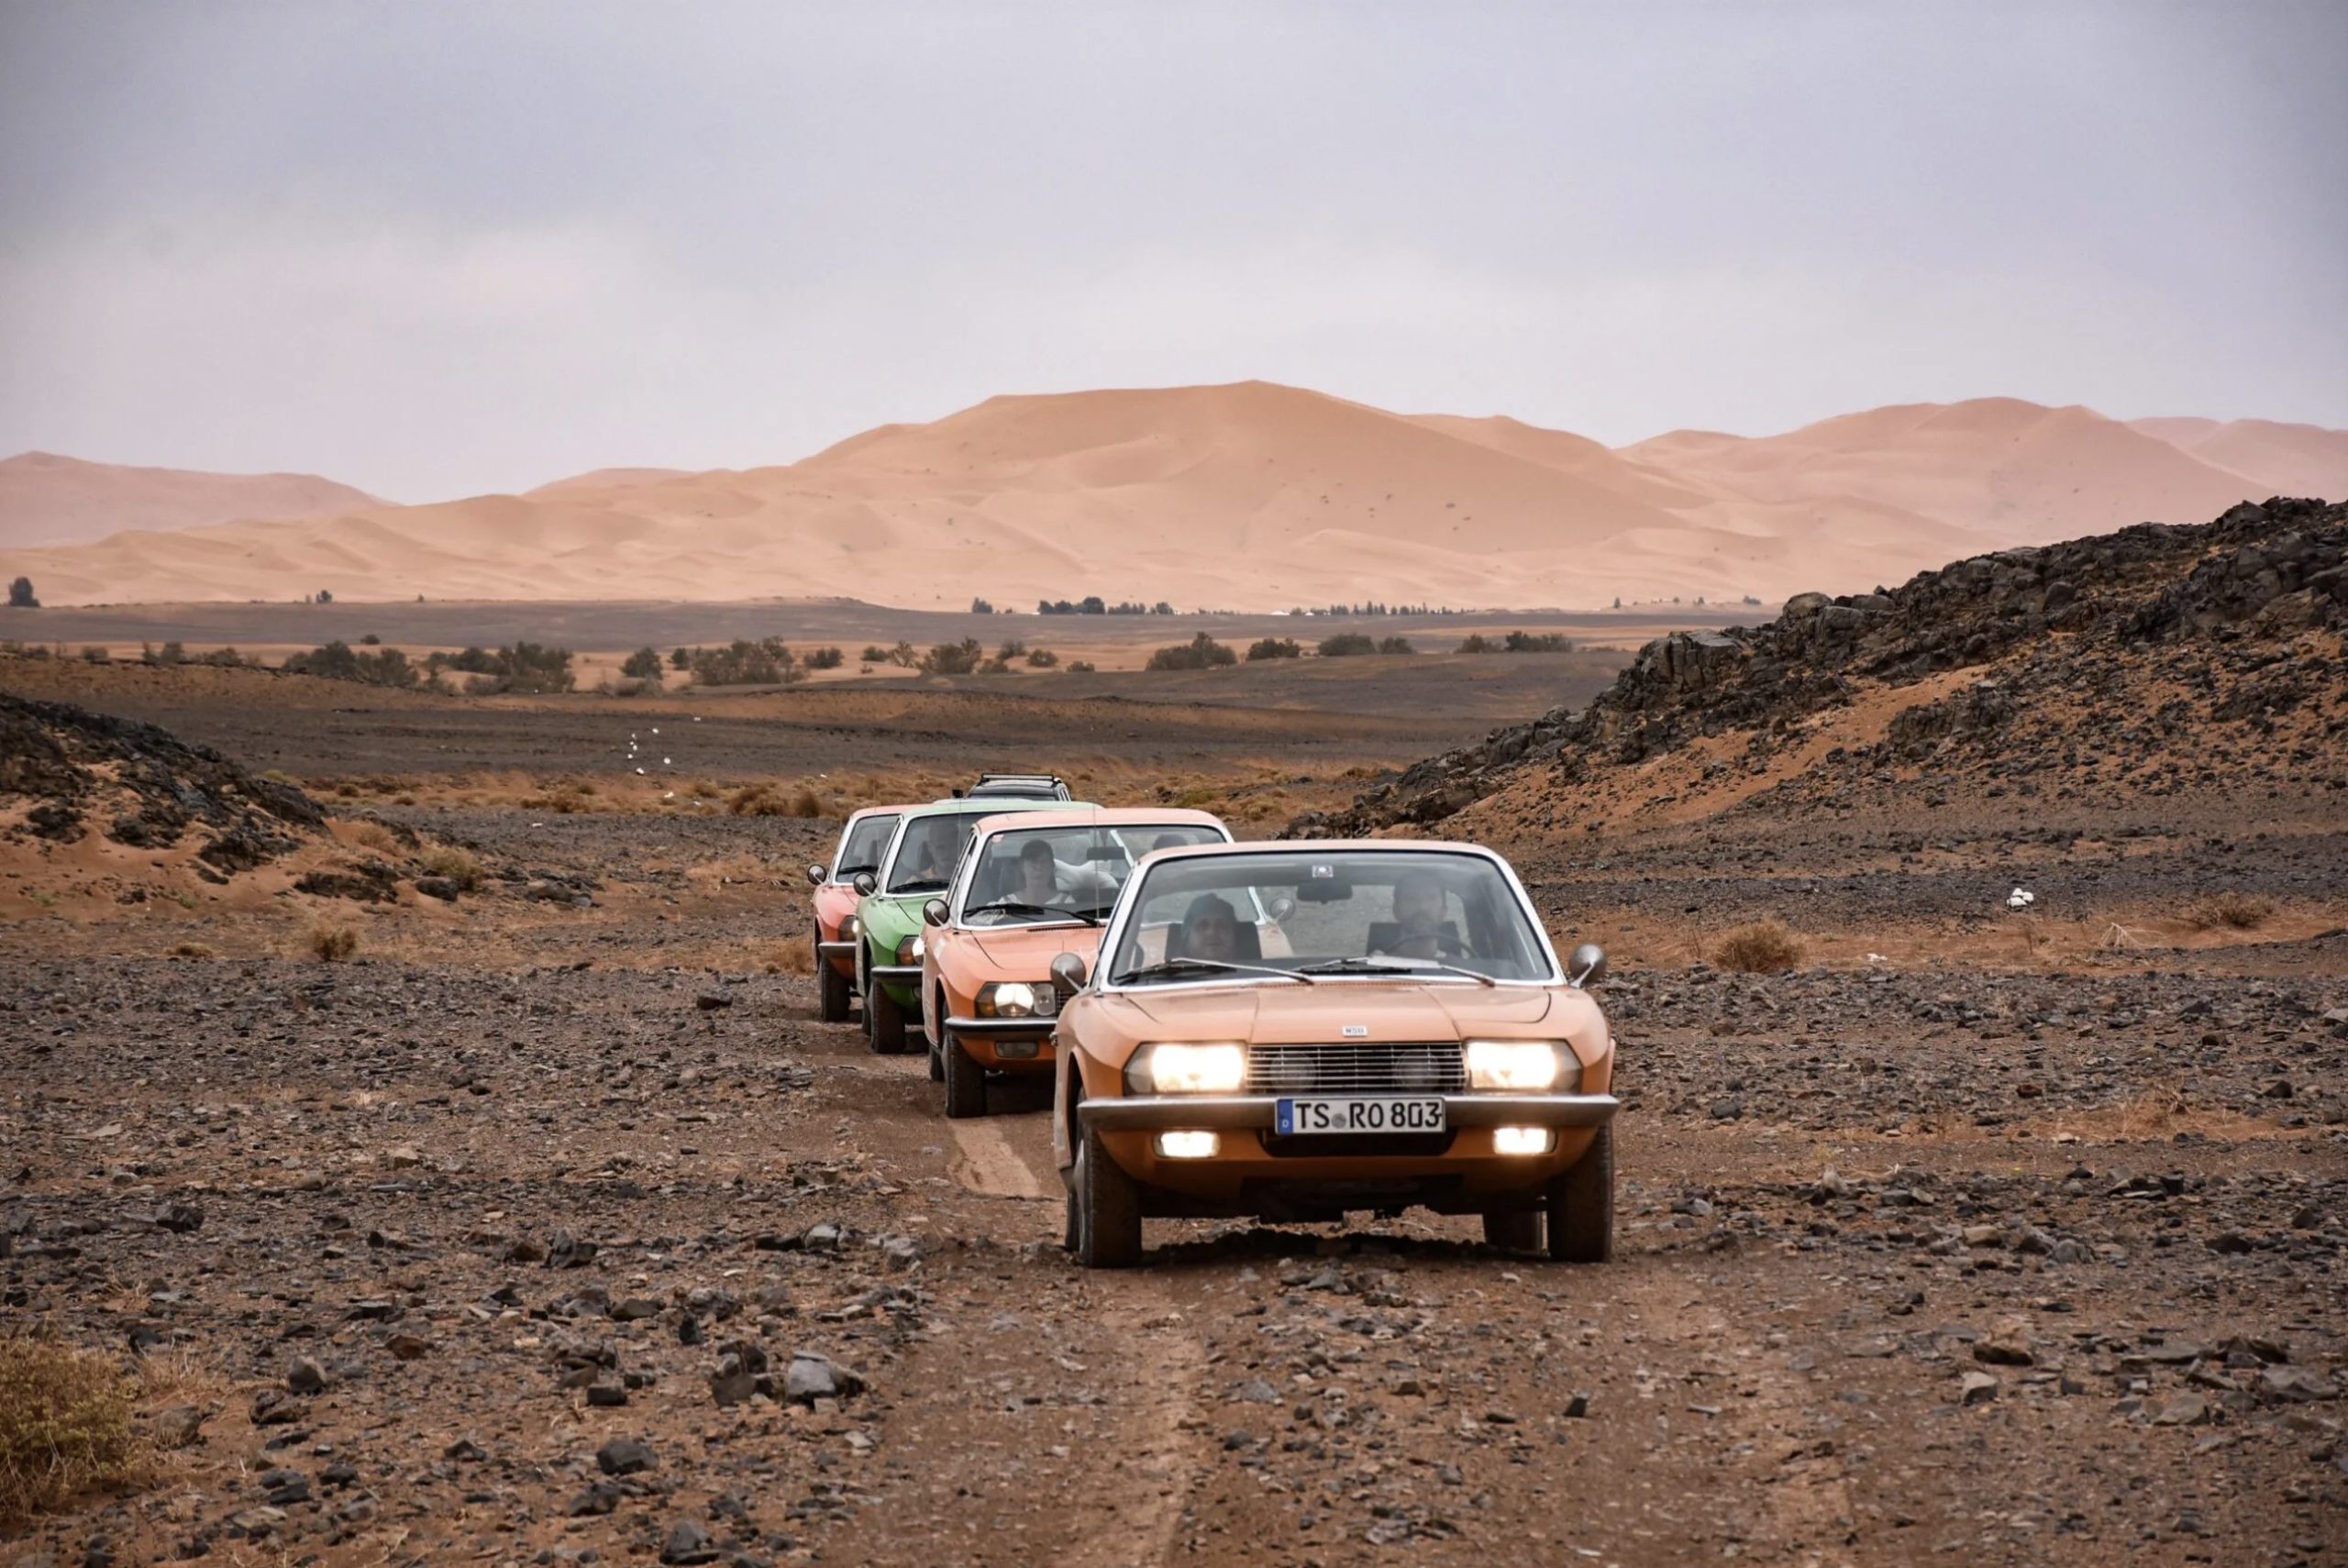 Seven Ro 80s survived the Sahara. Were NSU’s doubters wrong?